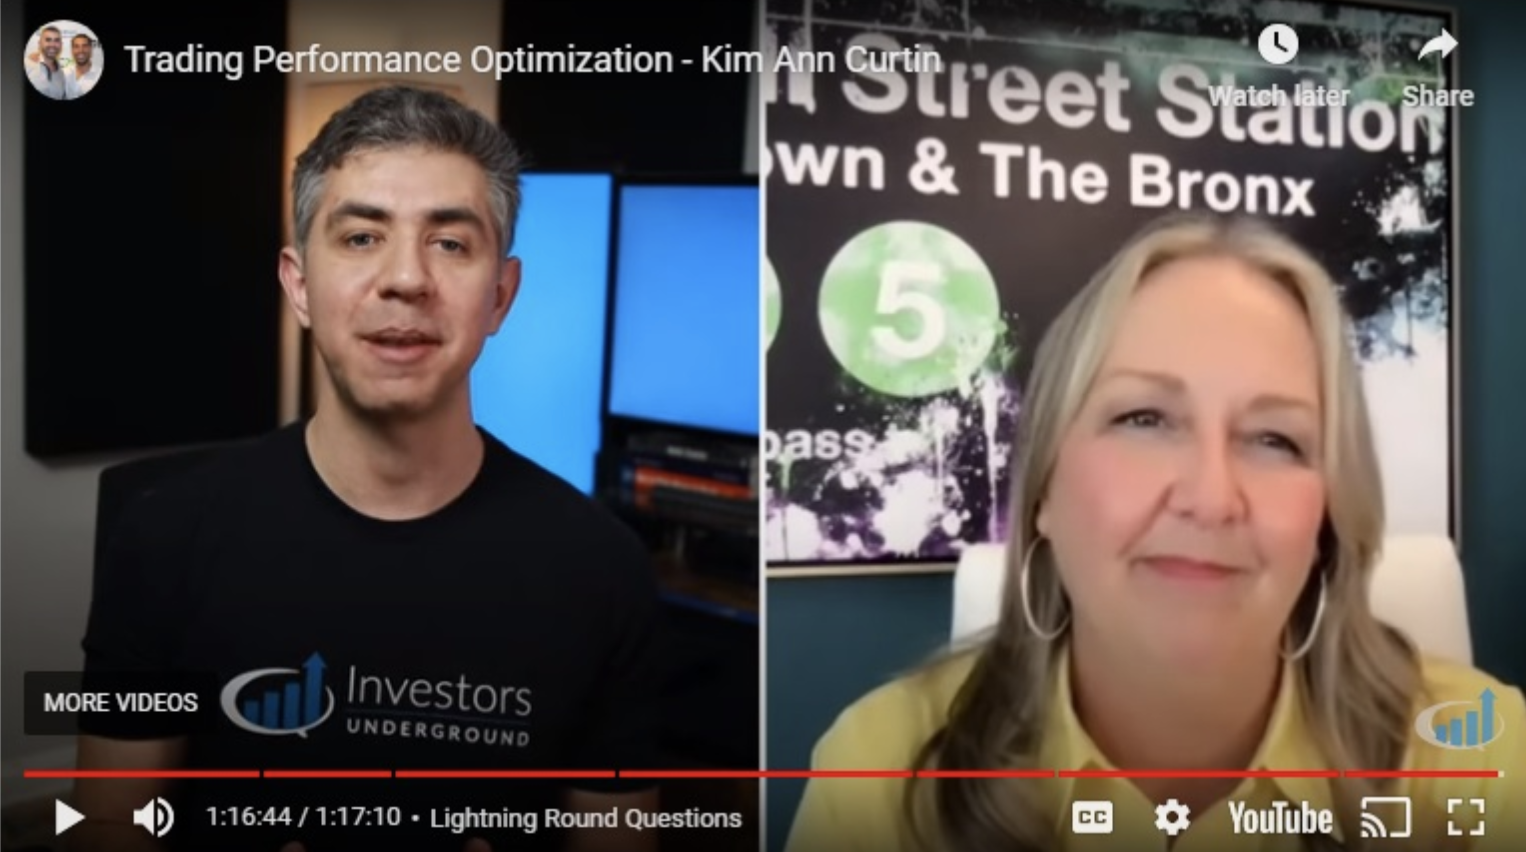 Investors Underground Asks Kim Ann Curtin to Share Top Coaching Insights